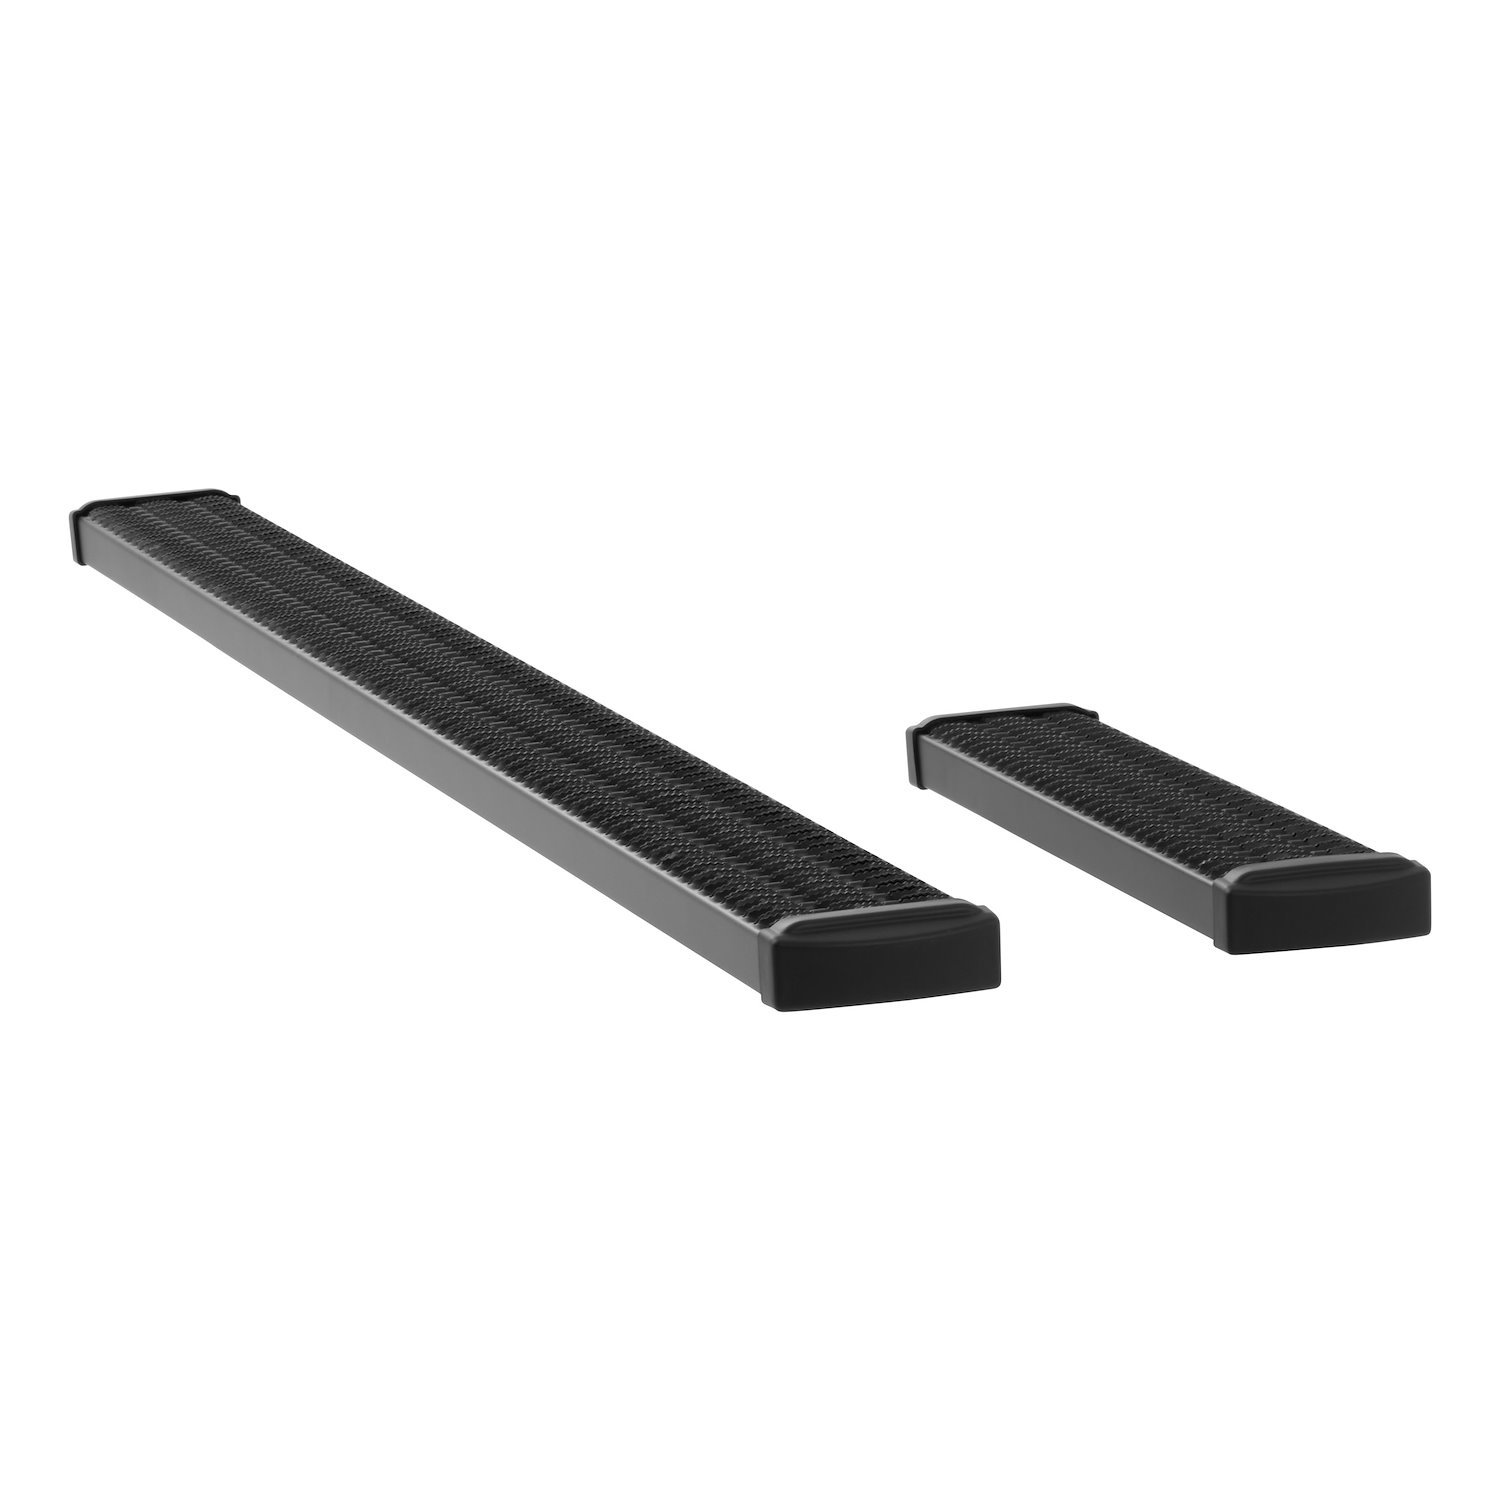 415100-400344 Grip Step 7 in. x 36 in., 100 in. Black Aluminum Running Boards Fits Select Chevy Express, GMC Savana